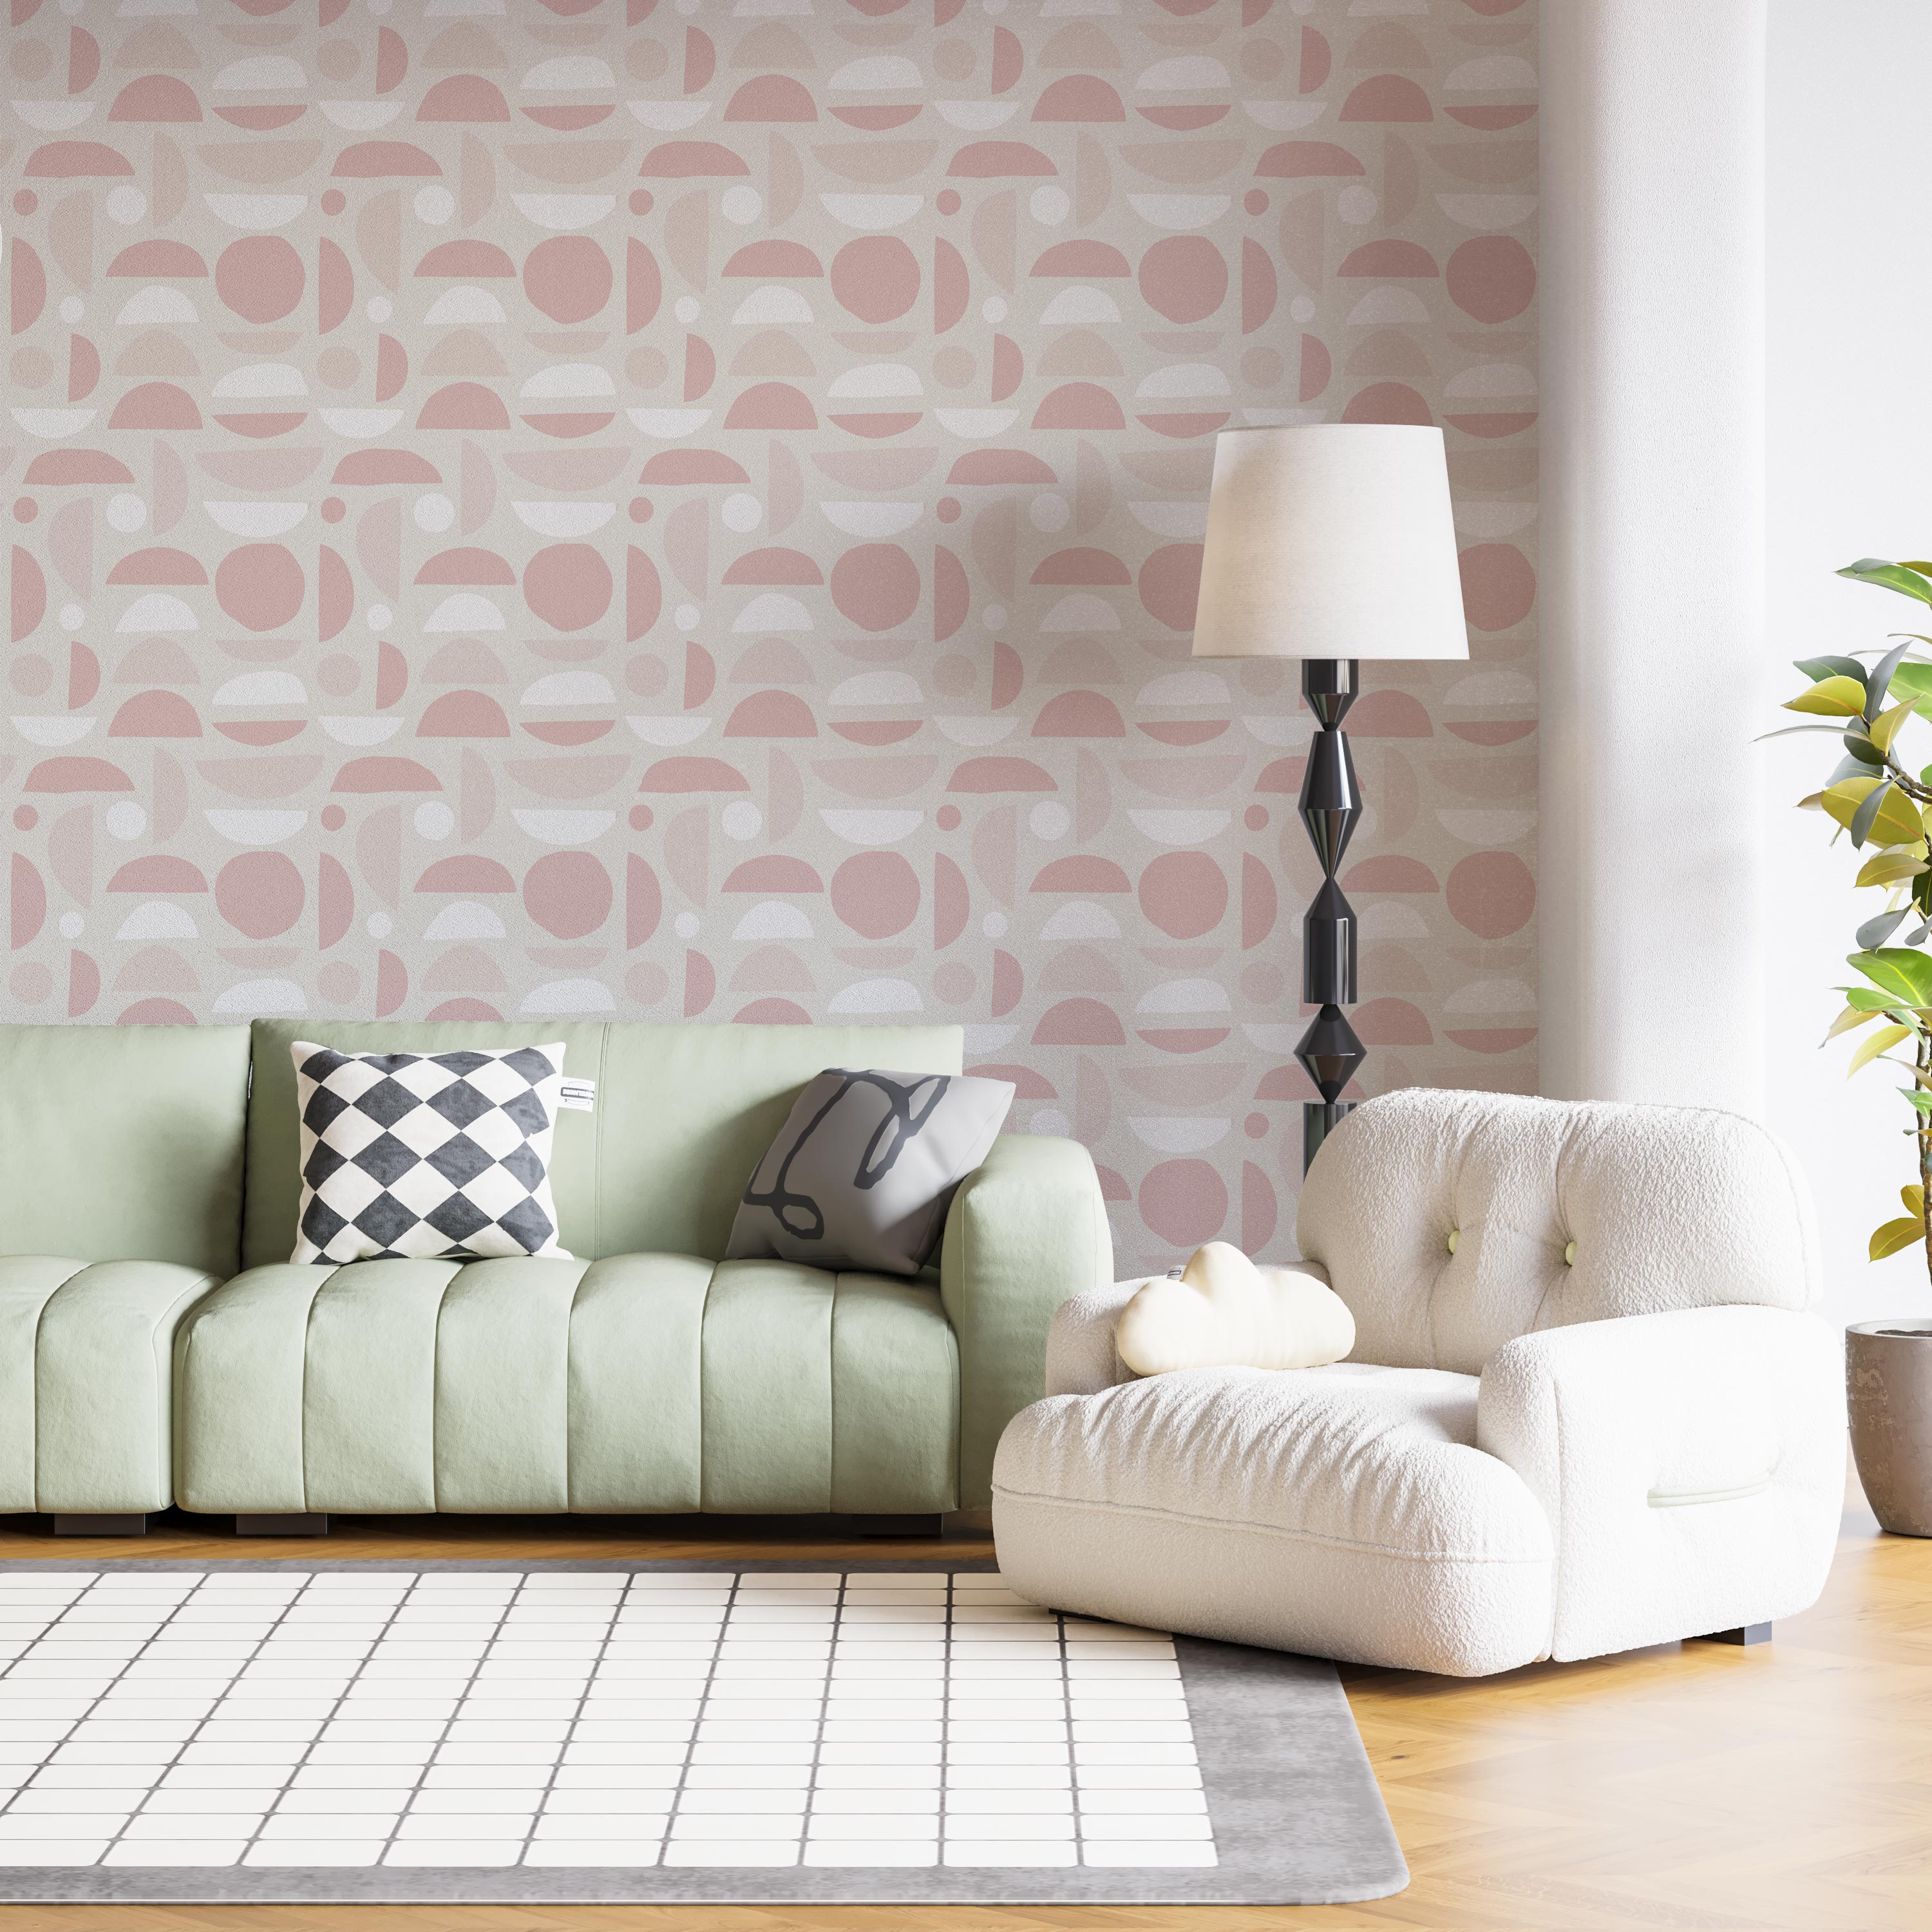 files/The-mid-century-modern-pink-wallpaper-mural-serves-as-a-dramatic-backdrop-for-a-modern-living-room_-adding-a-touch-of-boldness-and-visual-interest.-The-sleek-furniture-and-minimalist.jpg